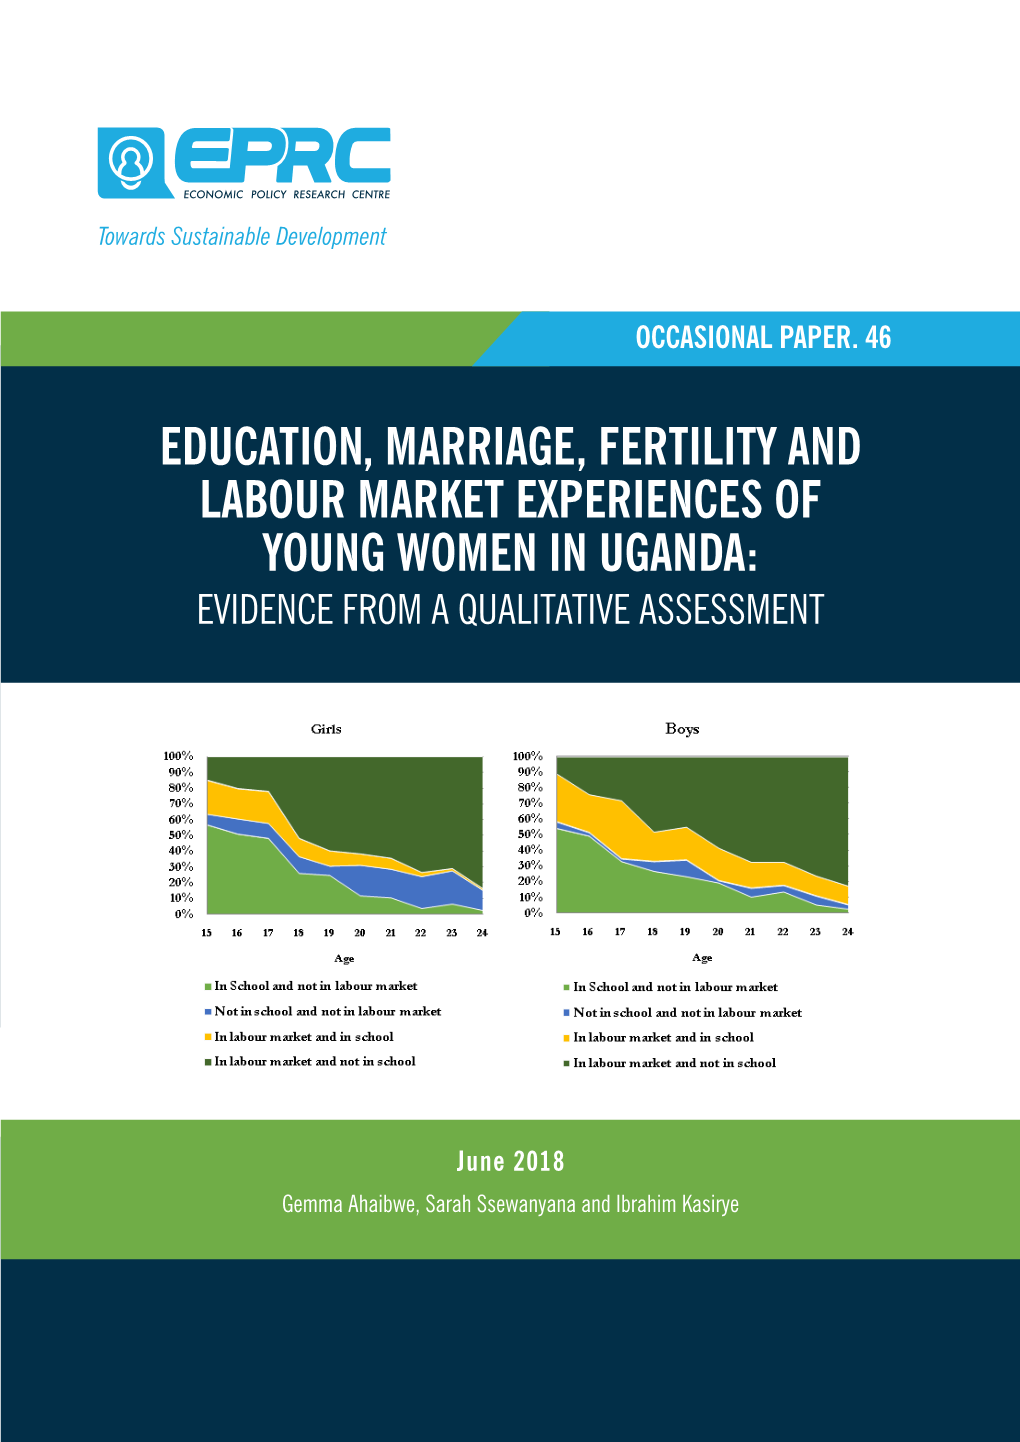 Education, Marriage, Fertility and Labour Market Experiences of Young Women in Uganda: Evidence from a Qualitative Assessment